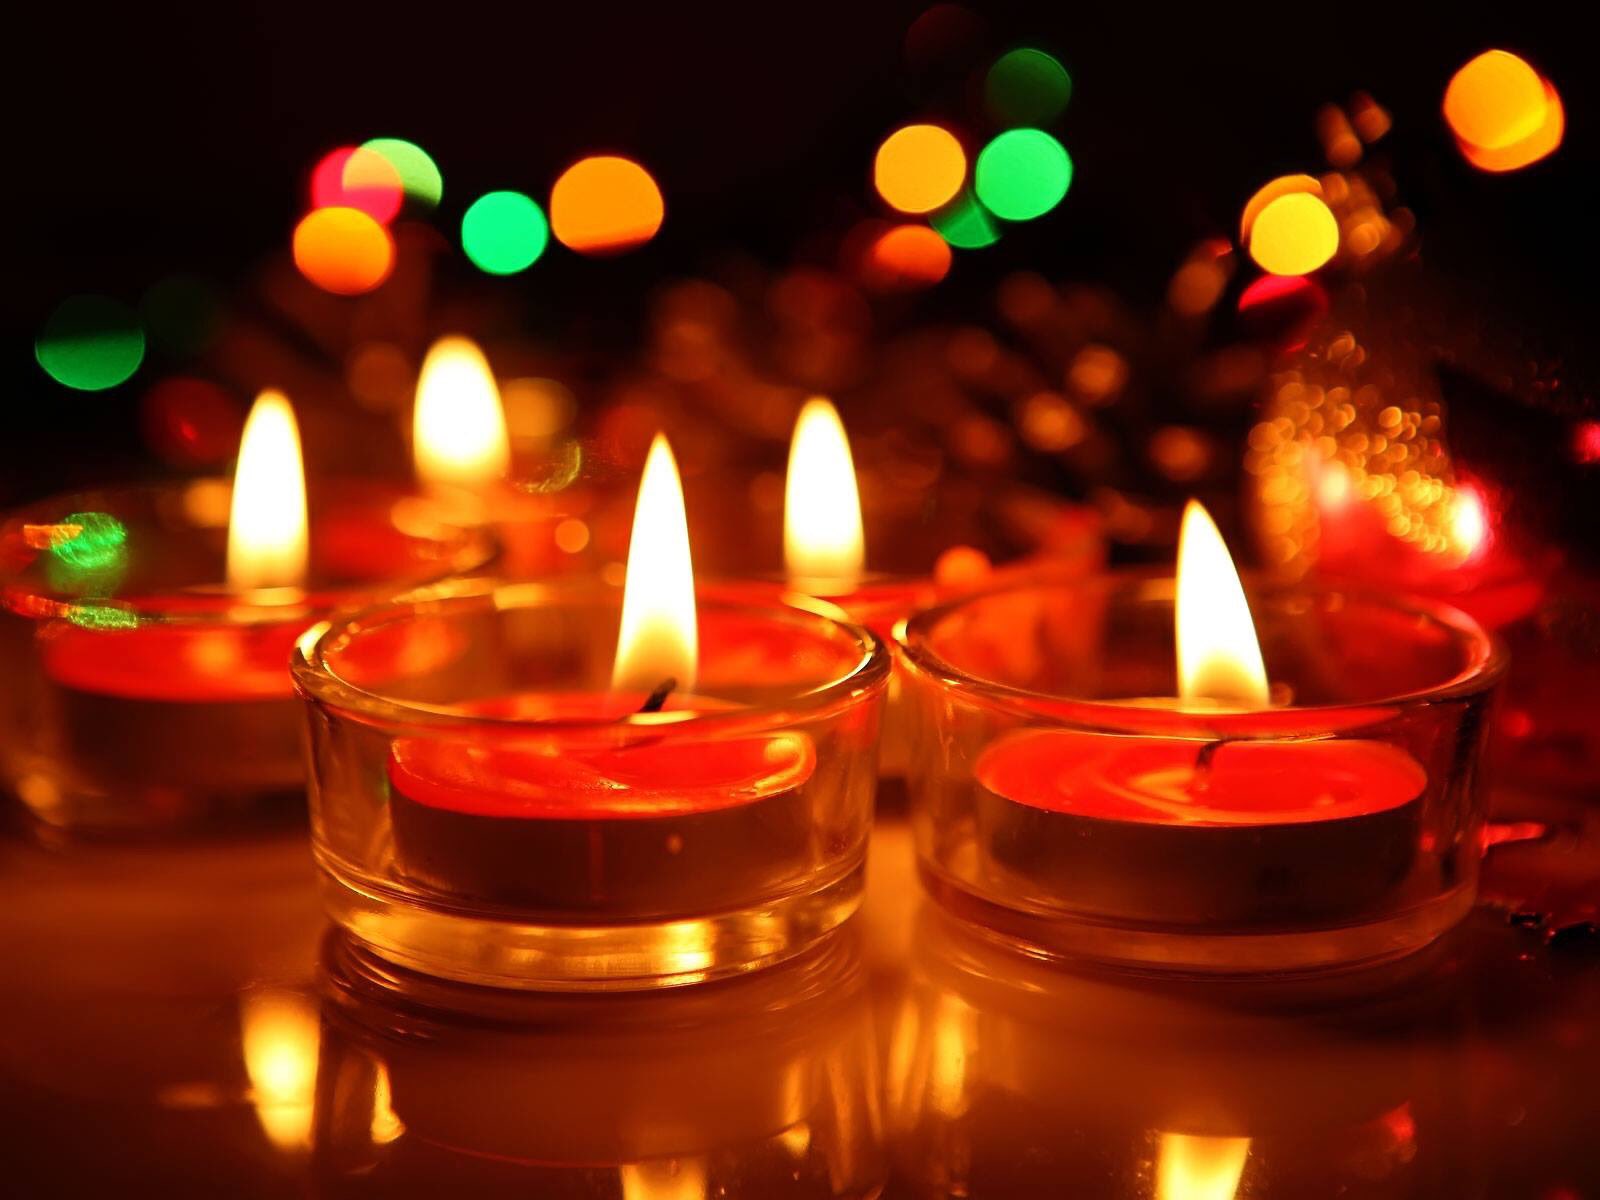 Hindu Holiday Diwali Gives Online Poker in India a Boost